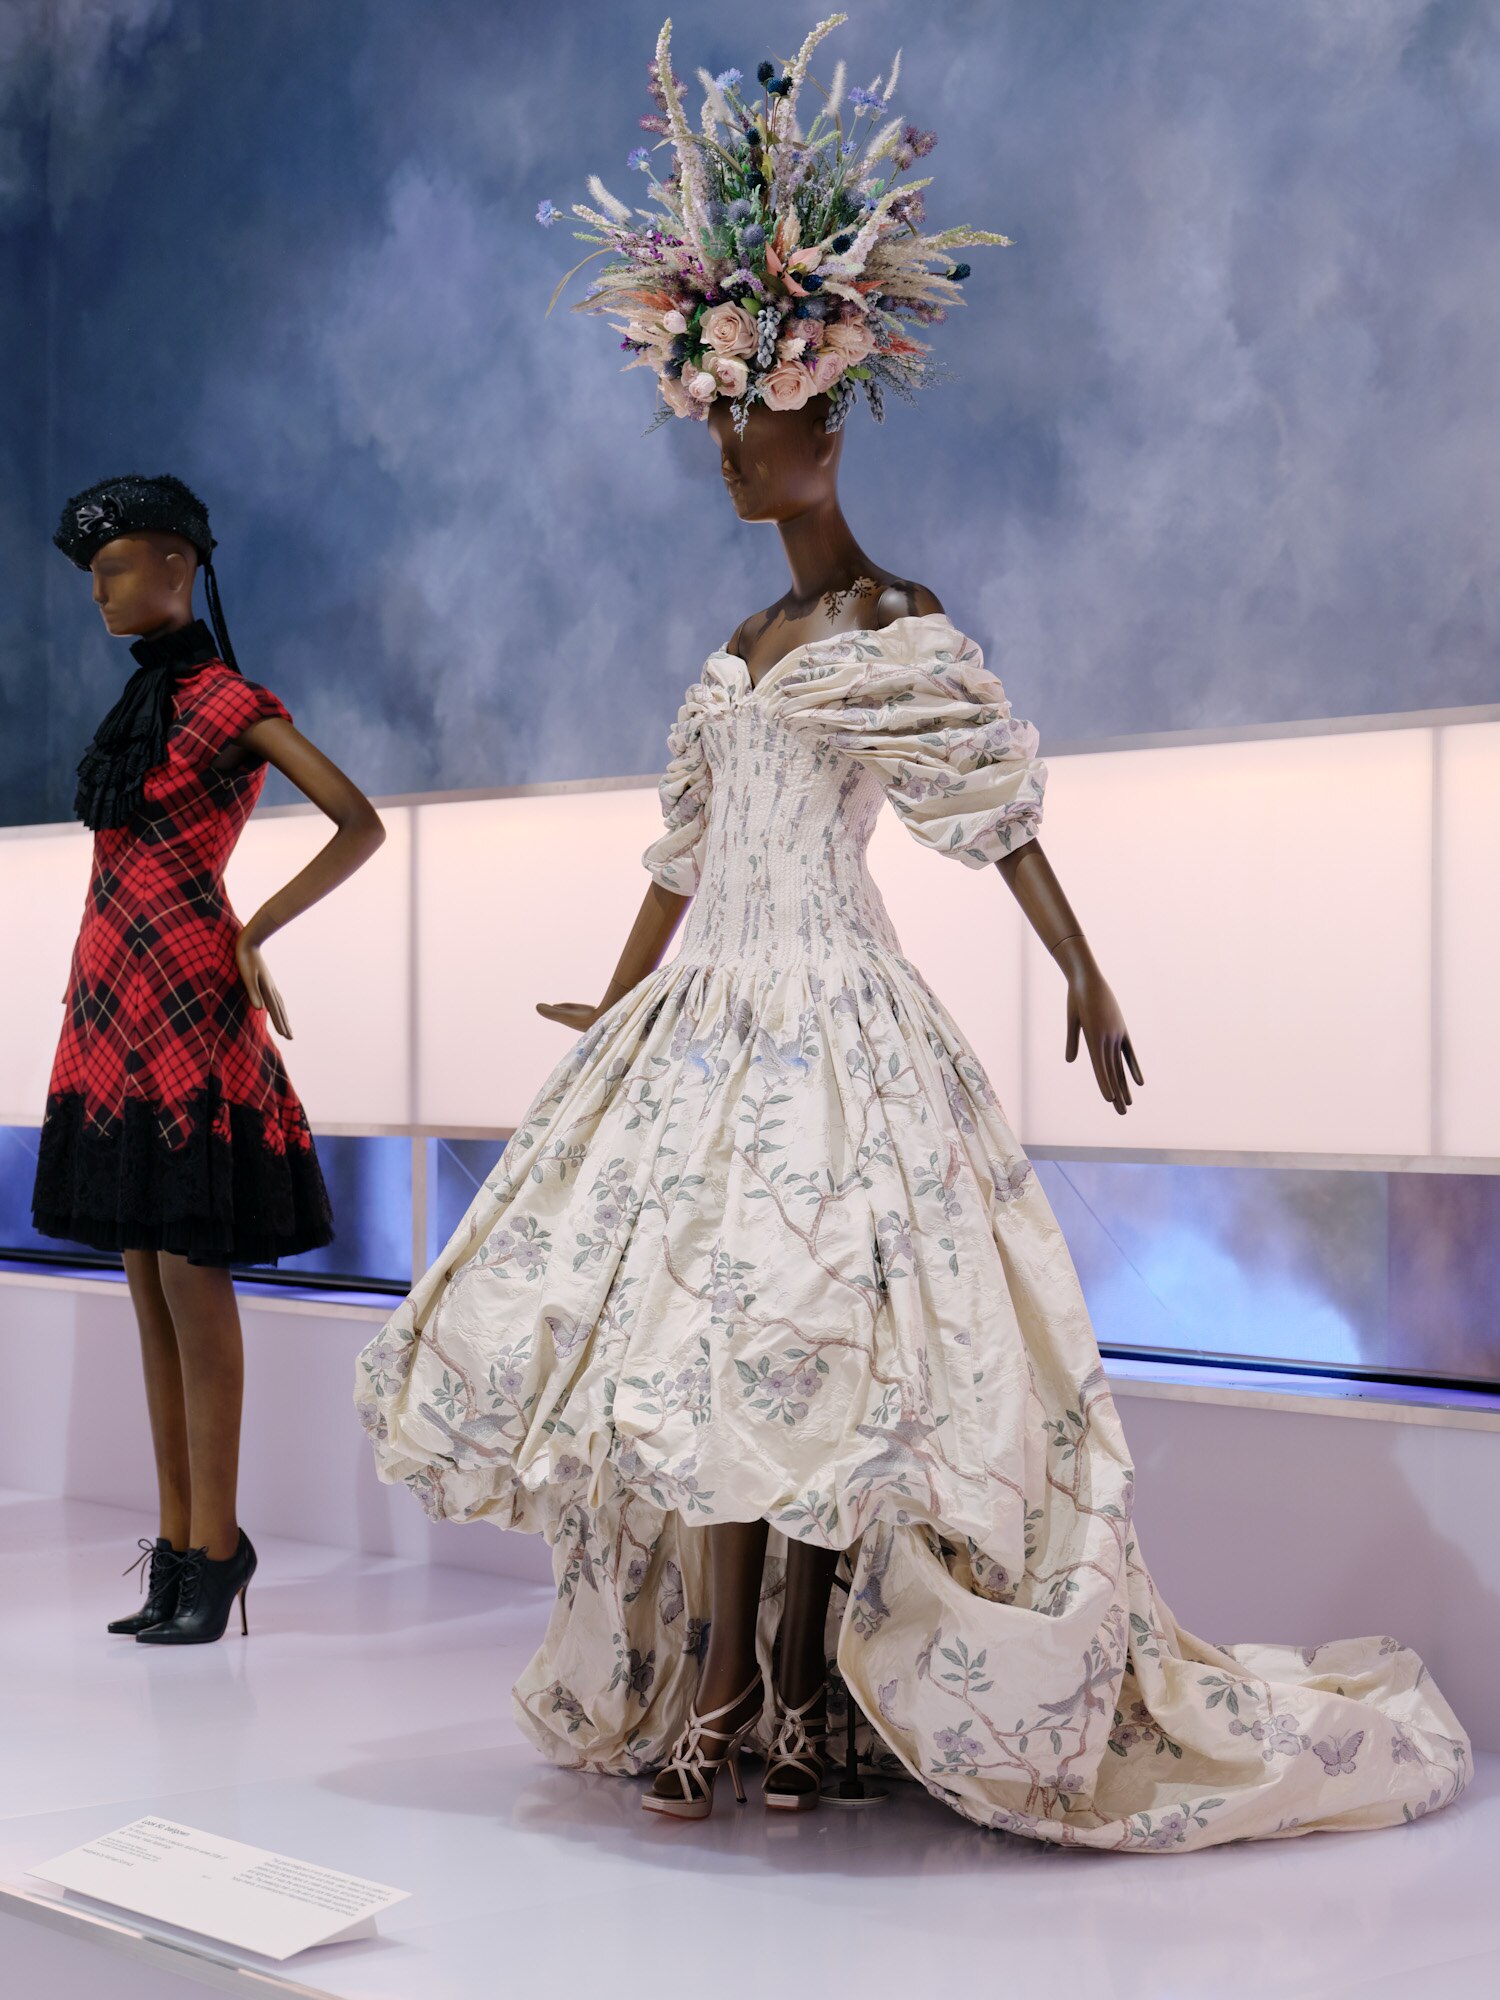 Gallery view showing, in foreground, a mannequin wearing an elaborate ballgown.